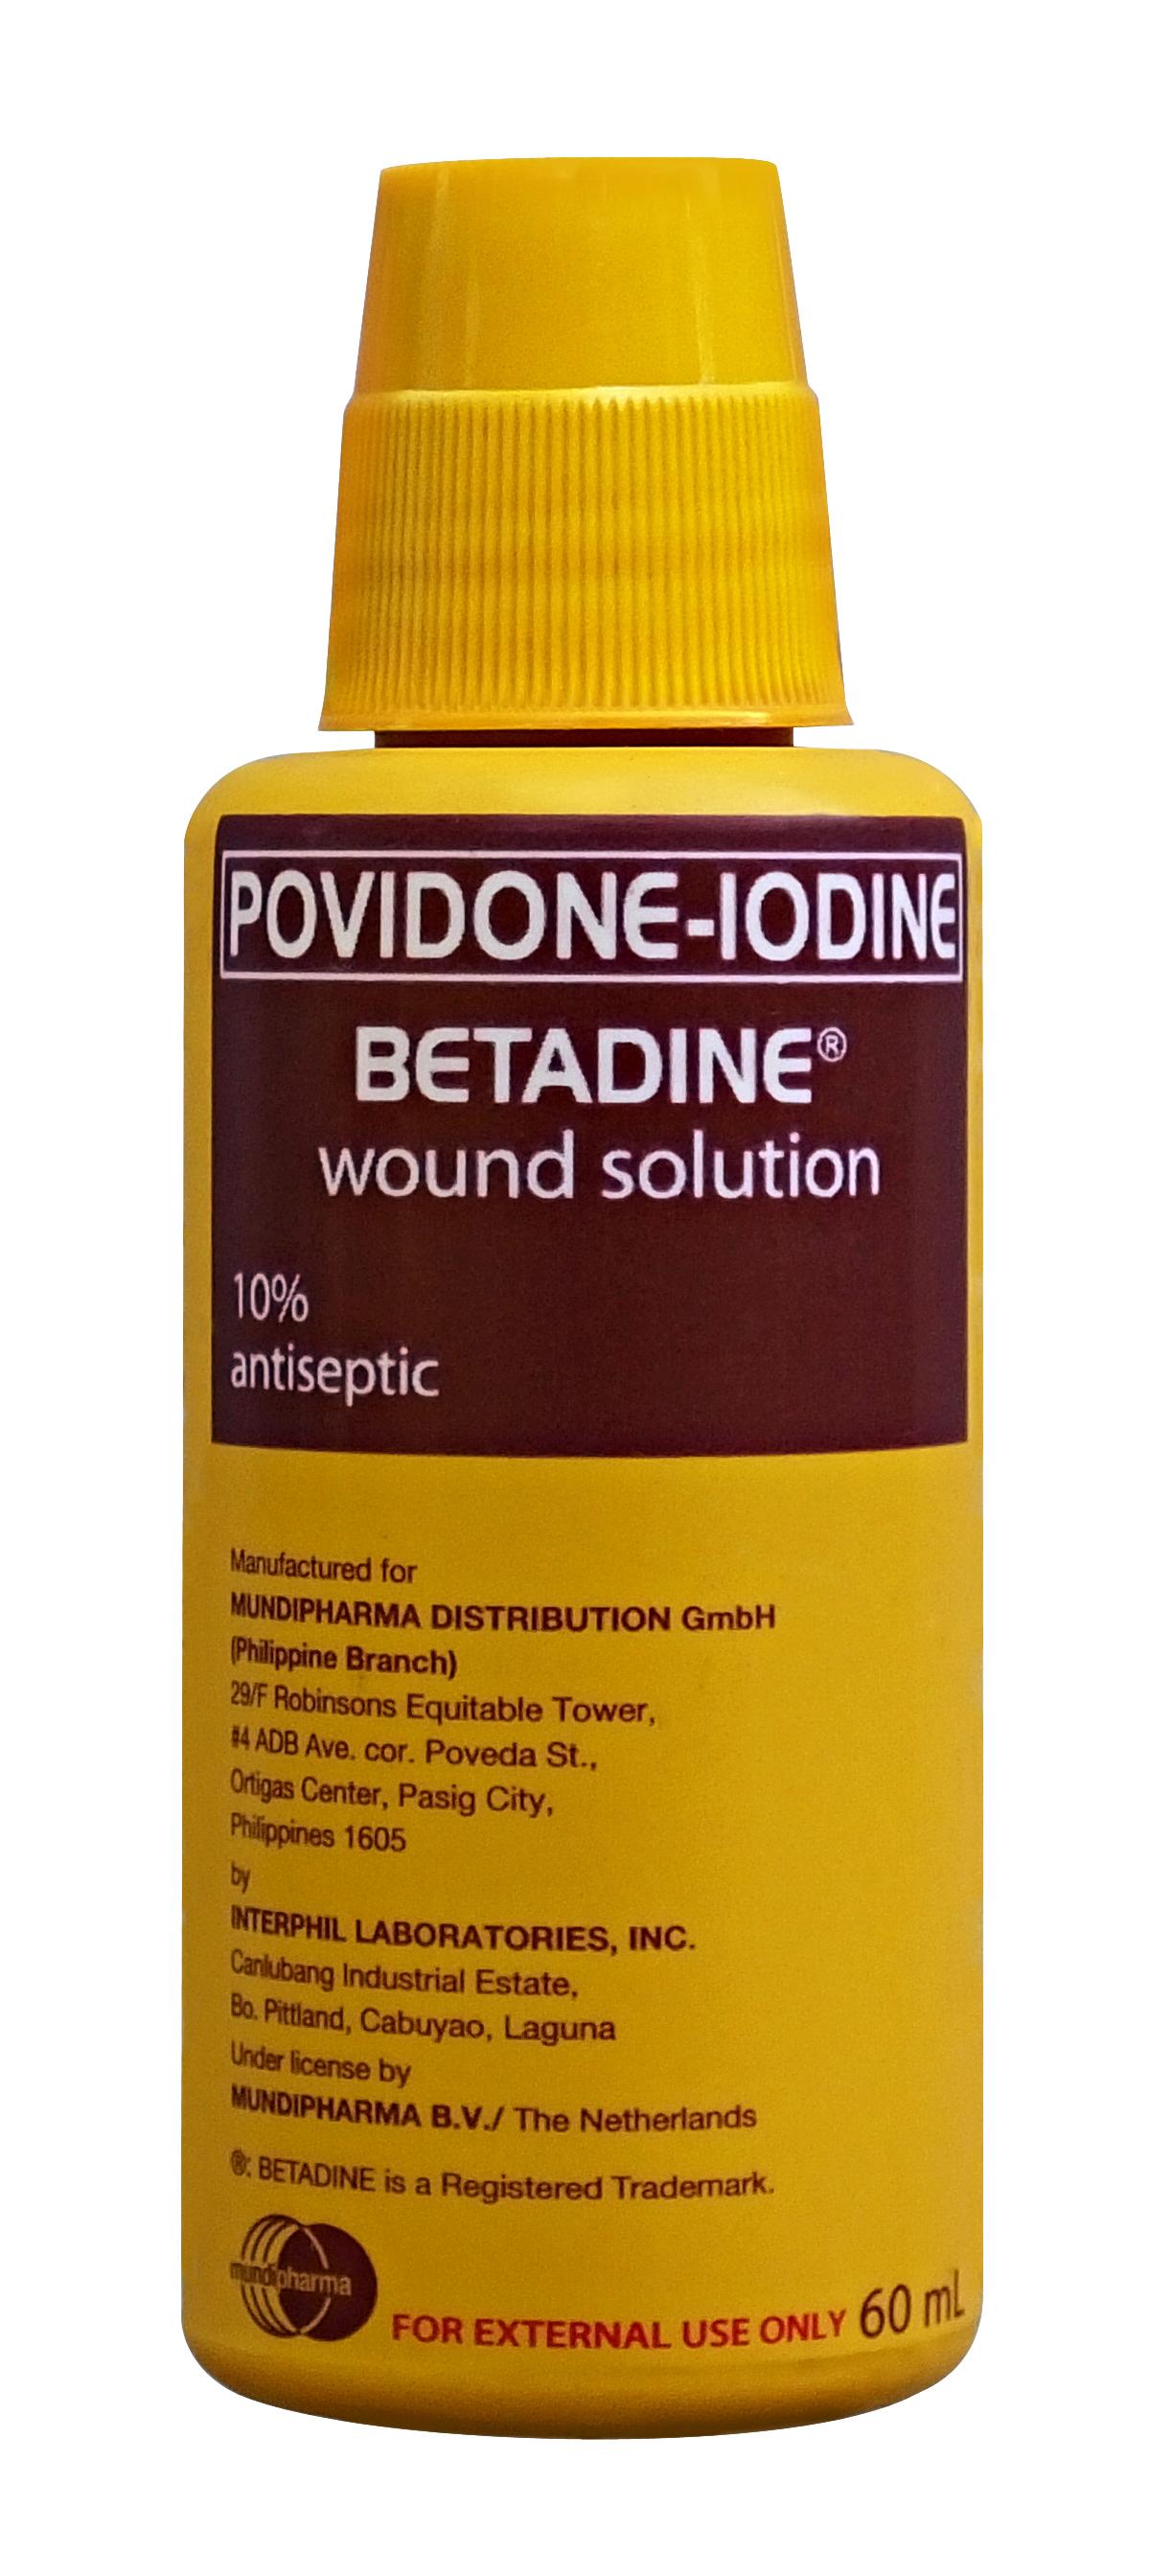 https://gba5gyv2.cdn.imgeng.in/images/default-source/ph/products/wound-care/betadine-wound-solution.jpg?sfvrsn=447e9733_1